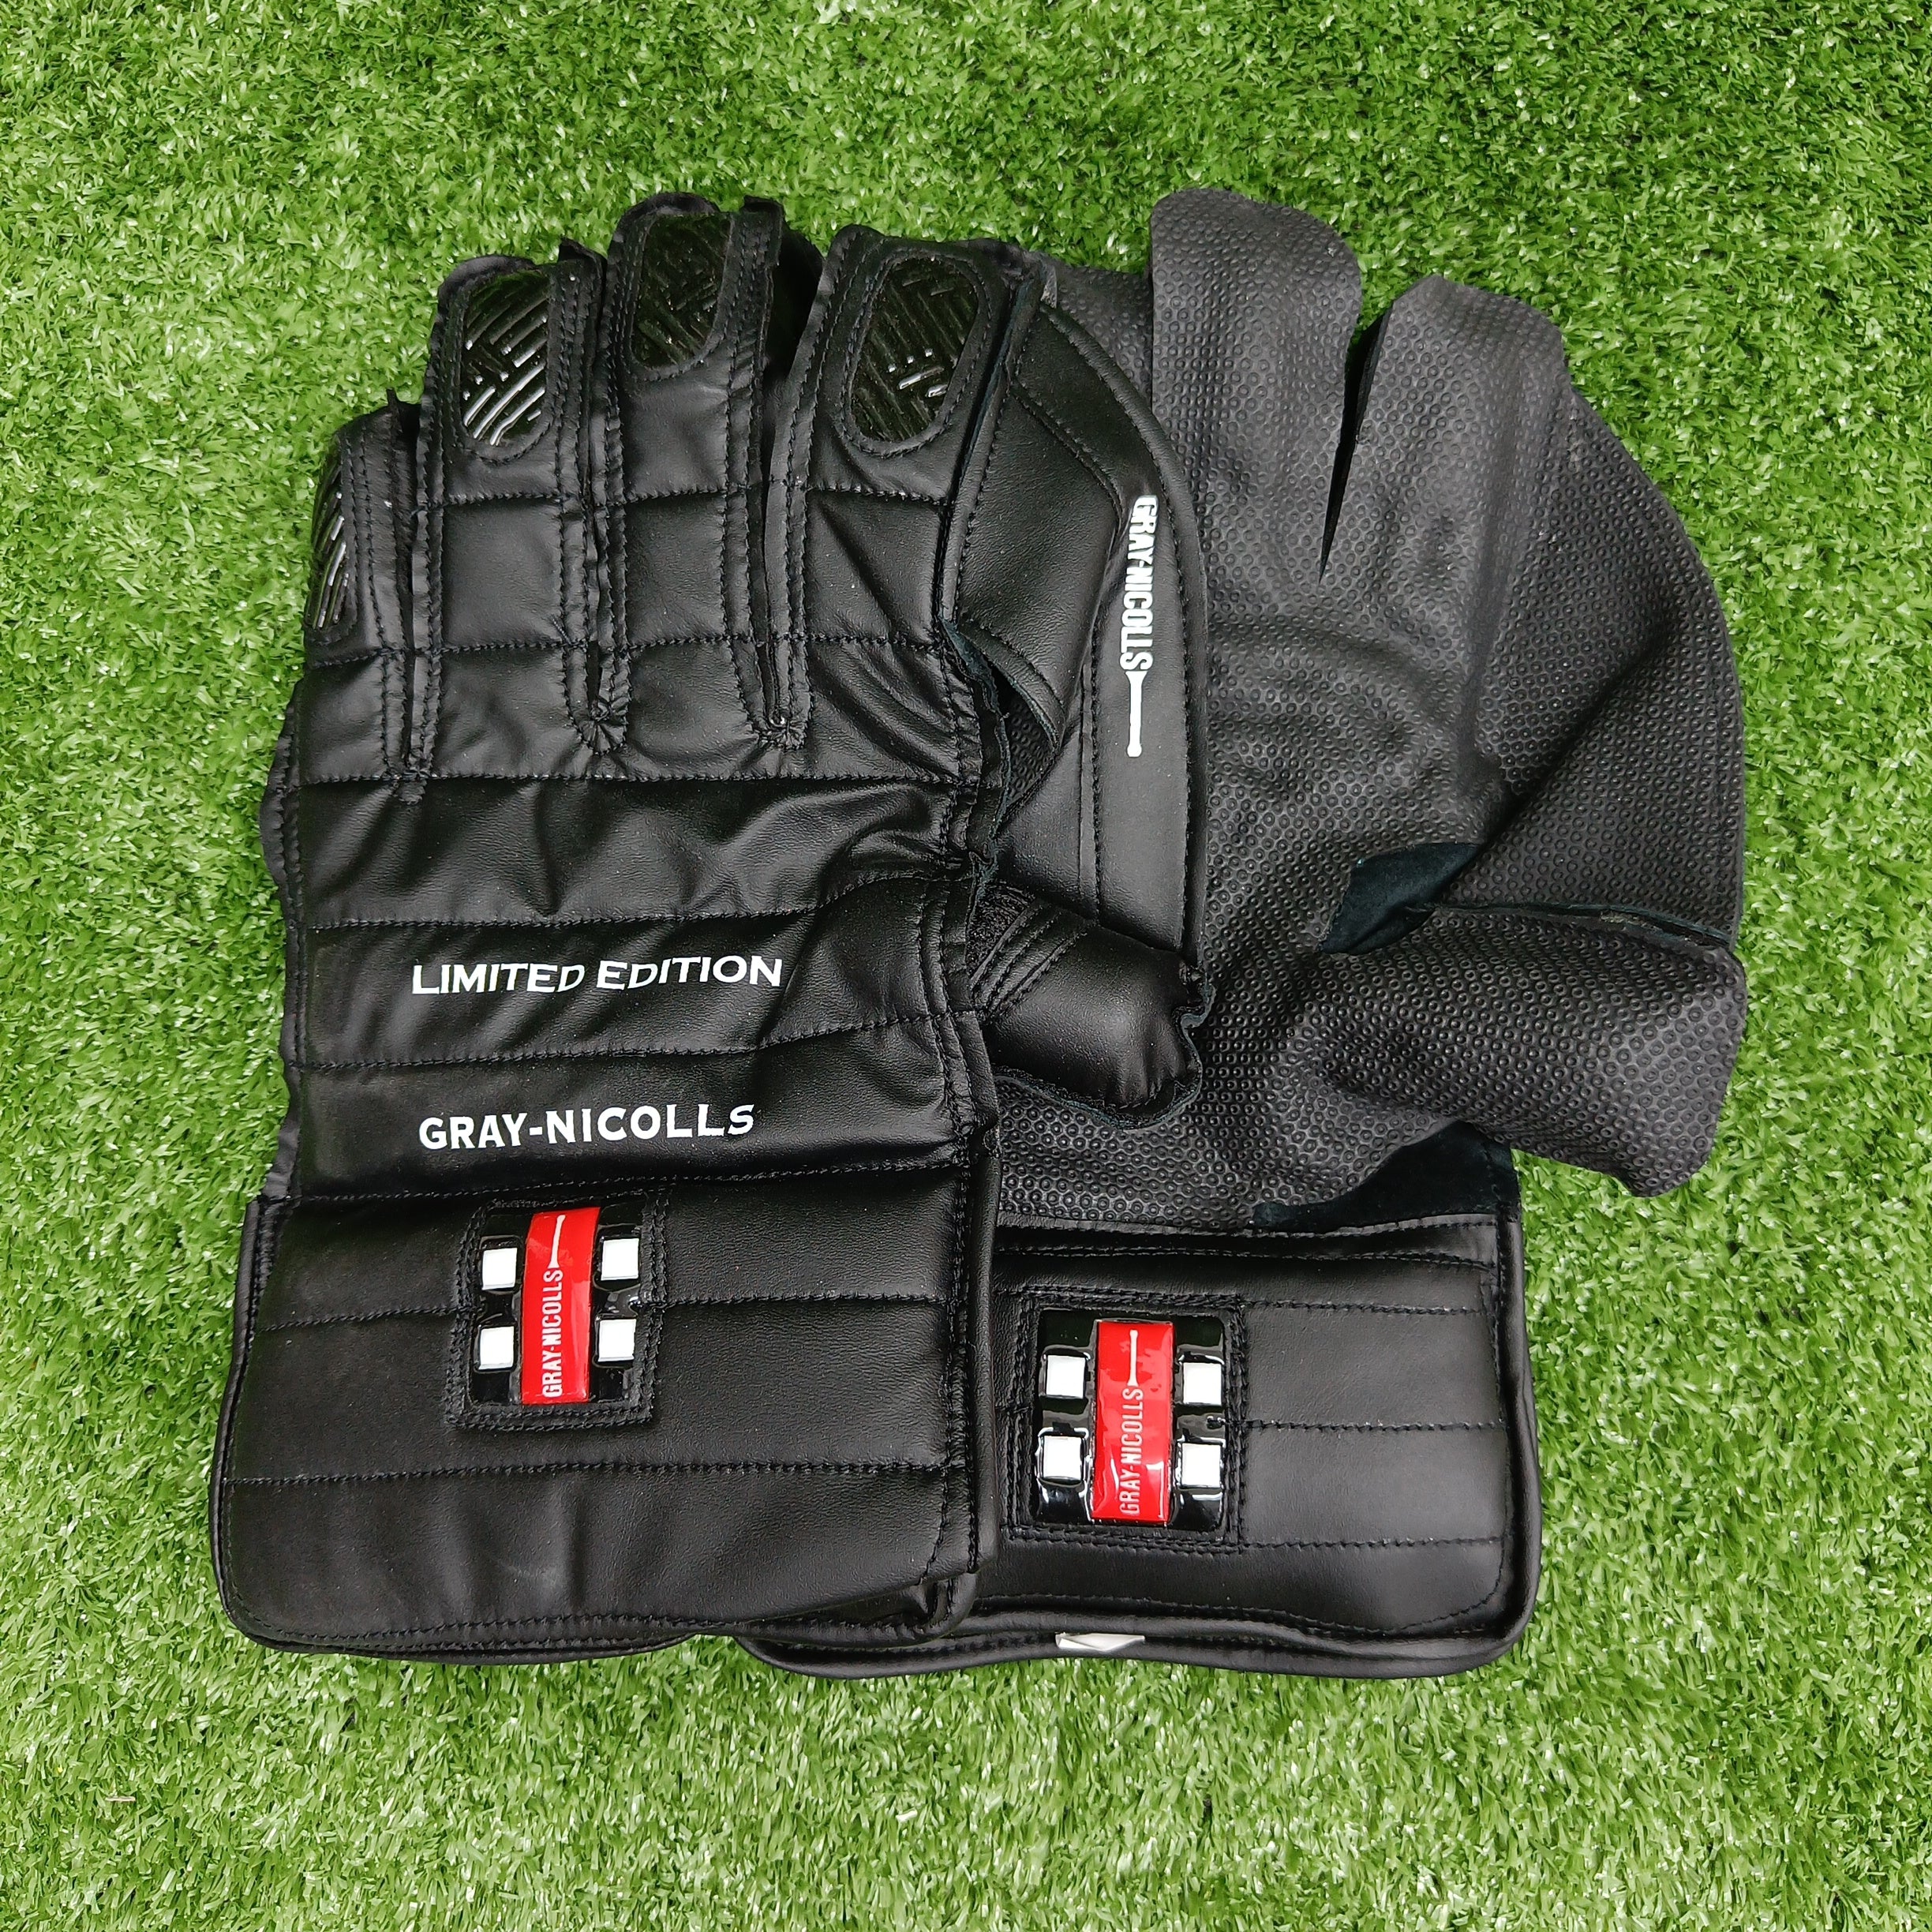 Gray-Nicolls Black Limited Edition Adult Cricket Wicket Keeping Gloves Black